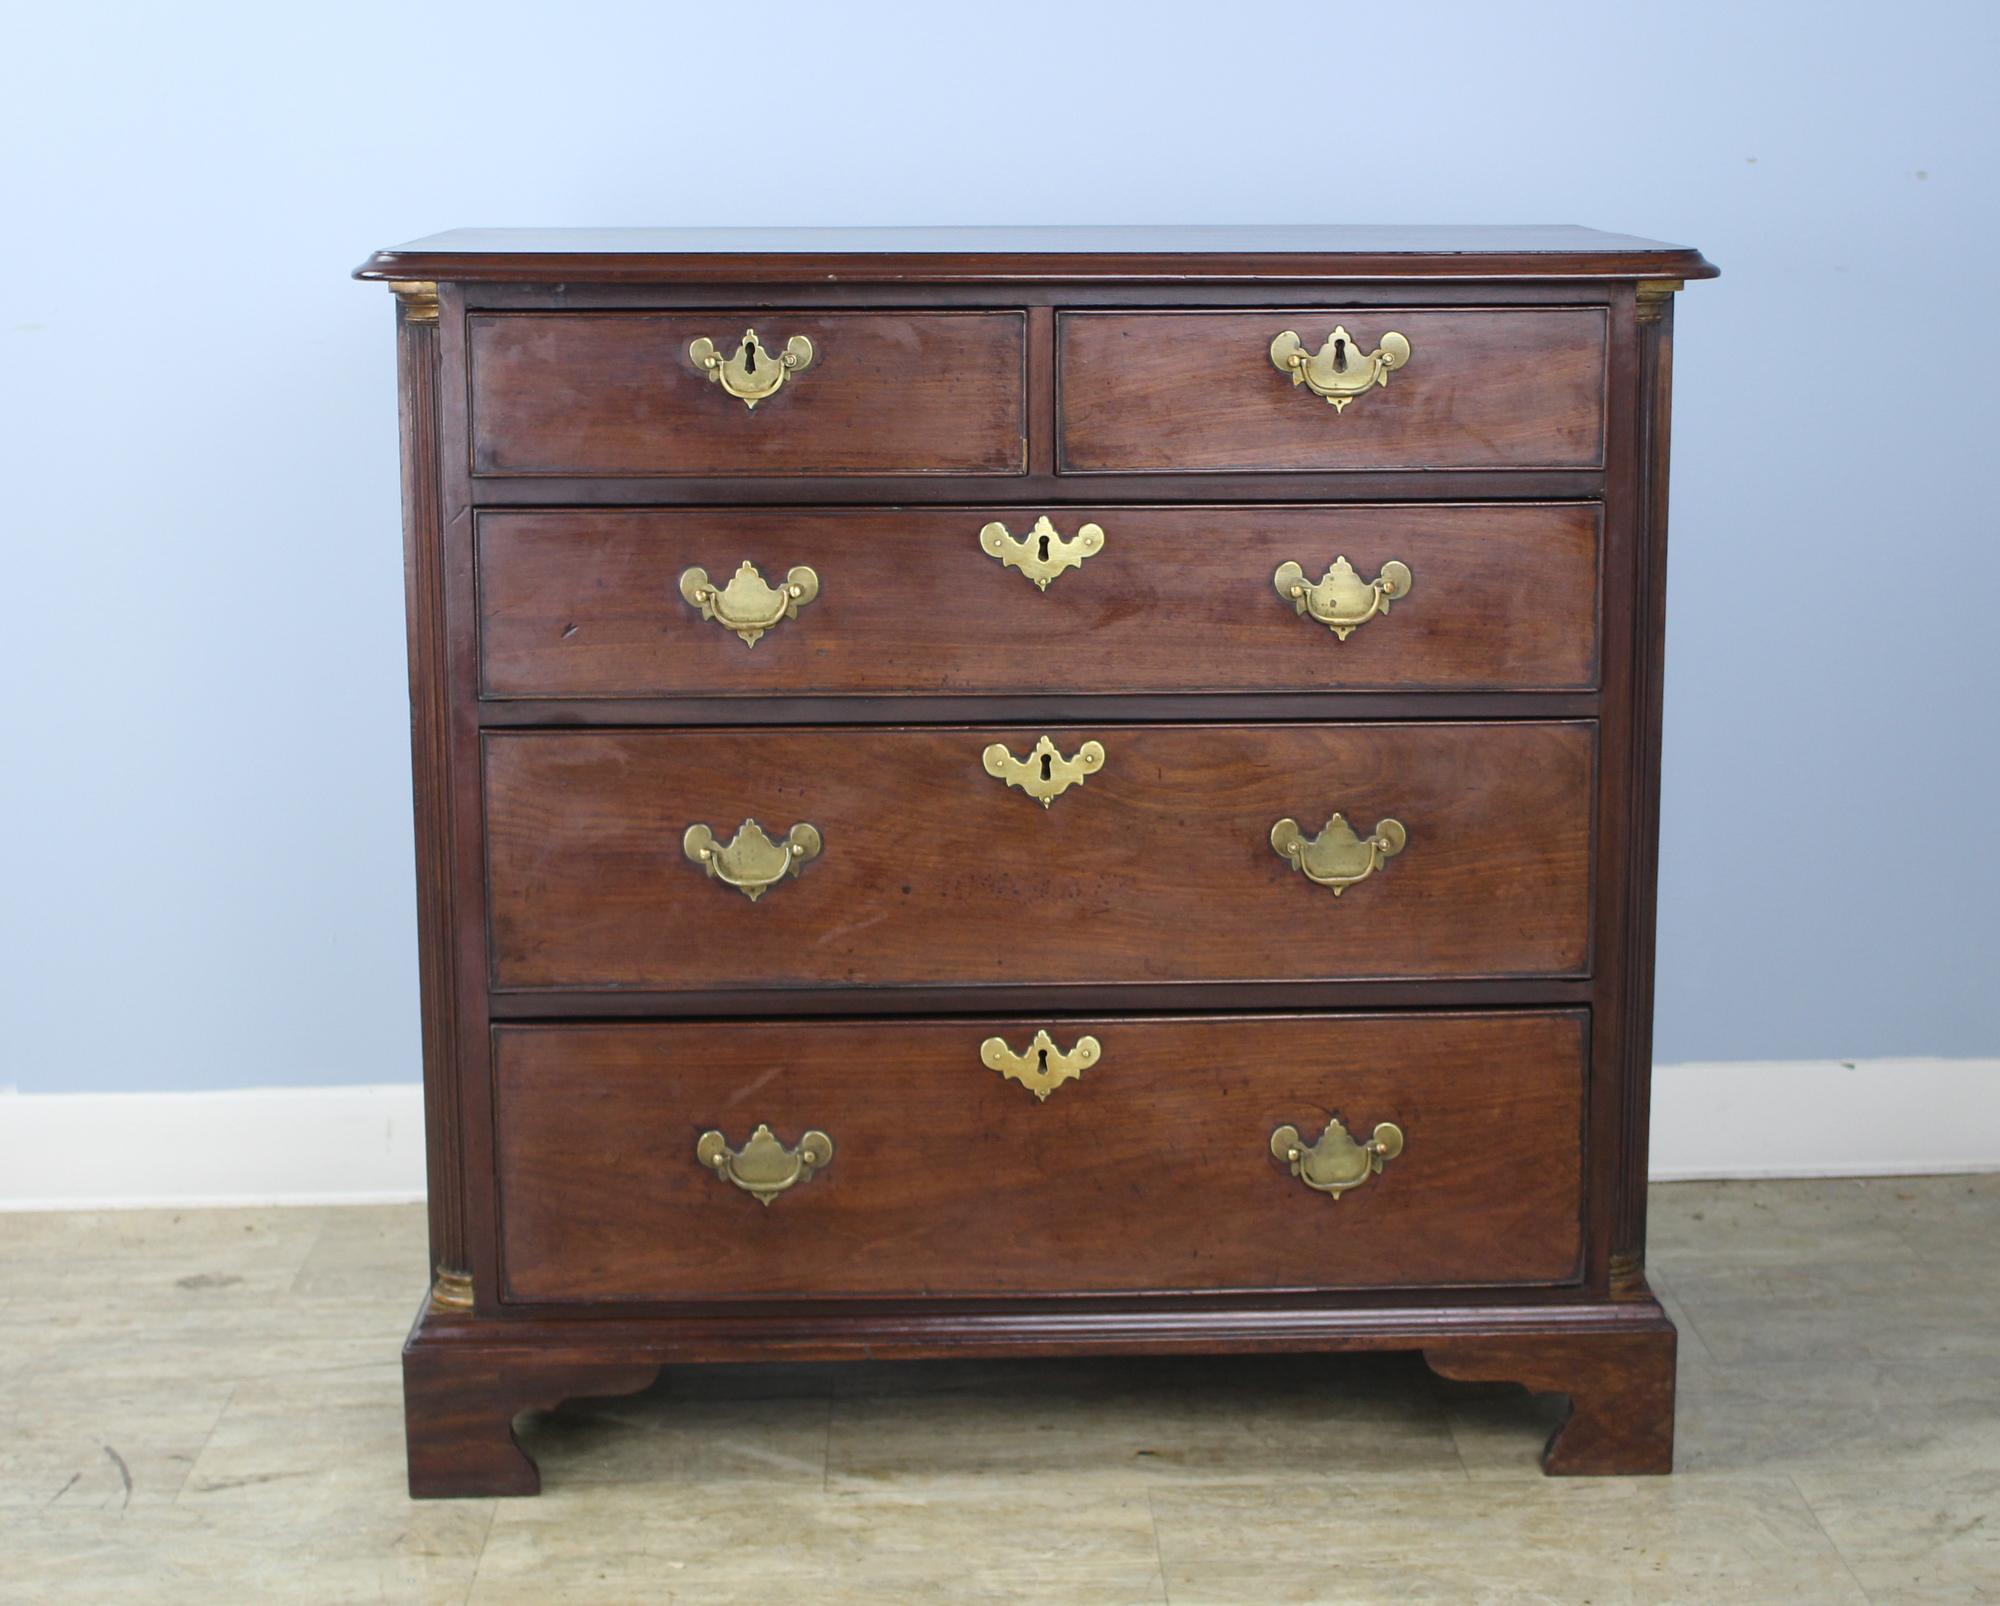 A handsome smaller early chest of drawers, with several key period details. The reeded quarter columns accented with brass capitals at top and bottom, the beading around the edge of the drawers and the ogee feet. Classic two-over-three construction.